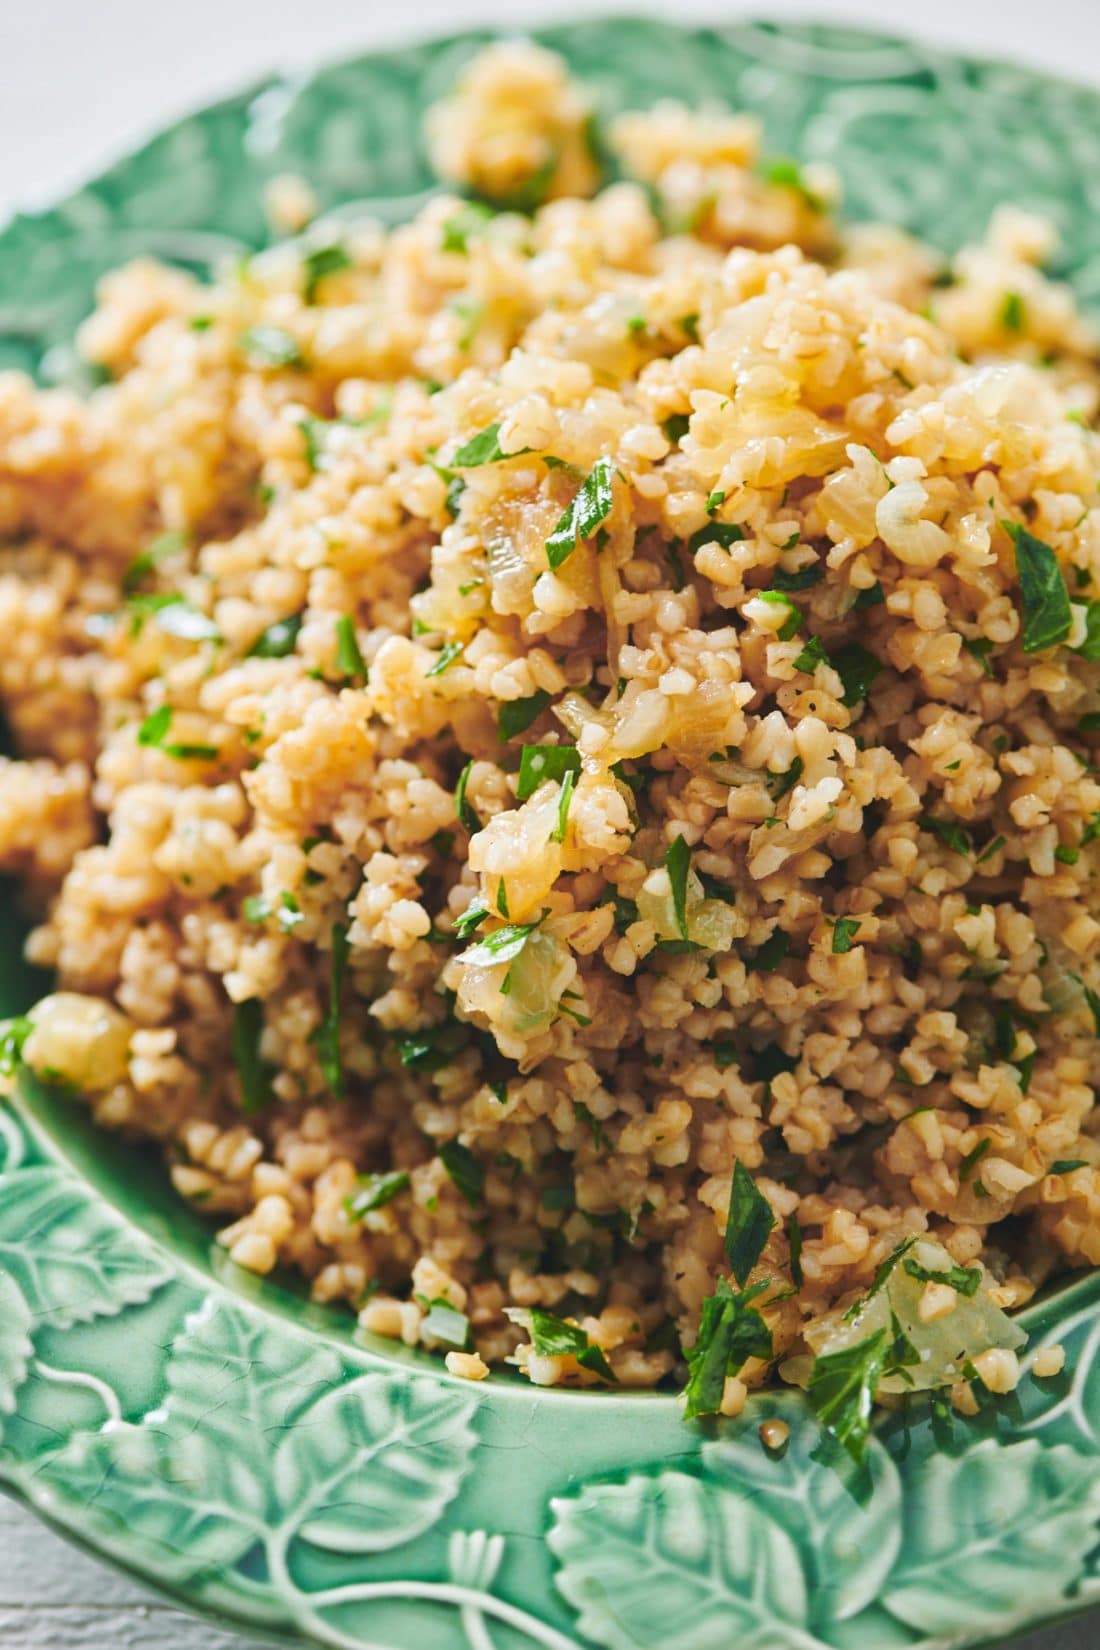 Bulgur Wheat with Caramelized Onions and Parsley